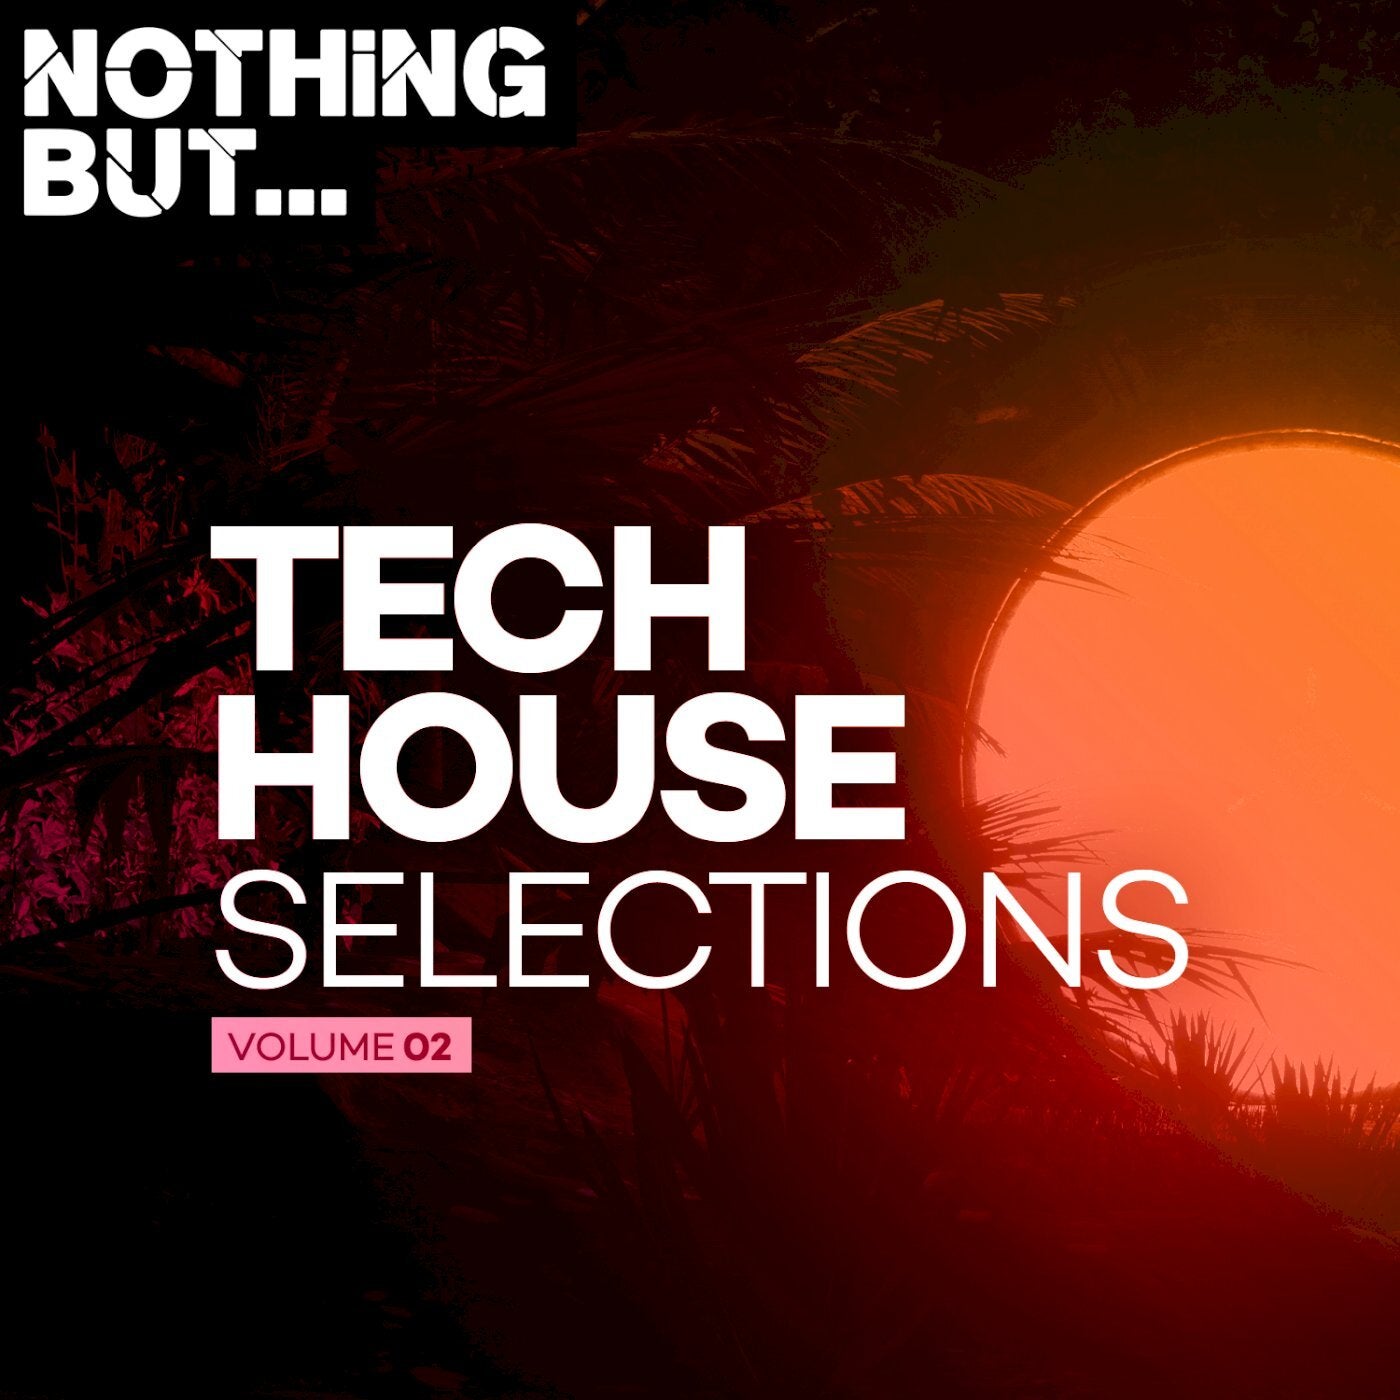 VA – Nothing But… Tech House Selections, Vol. 02 [NBTHS02]